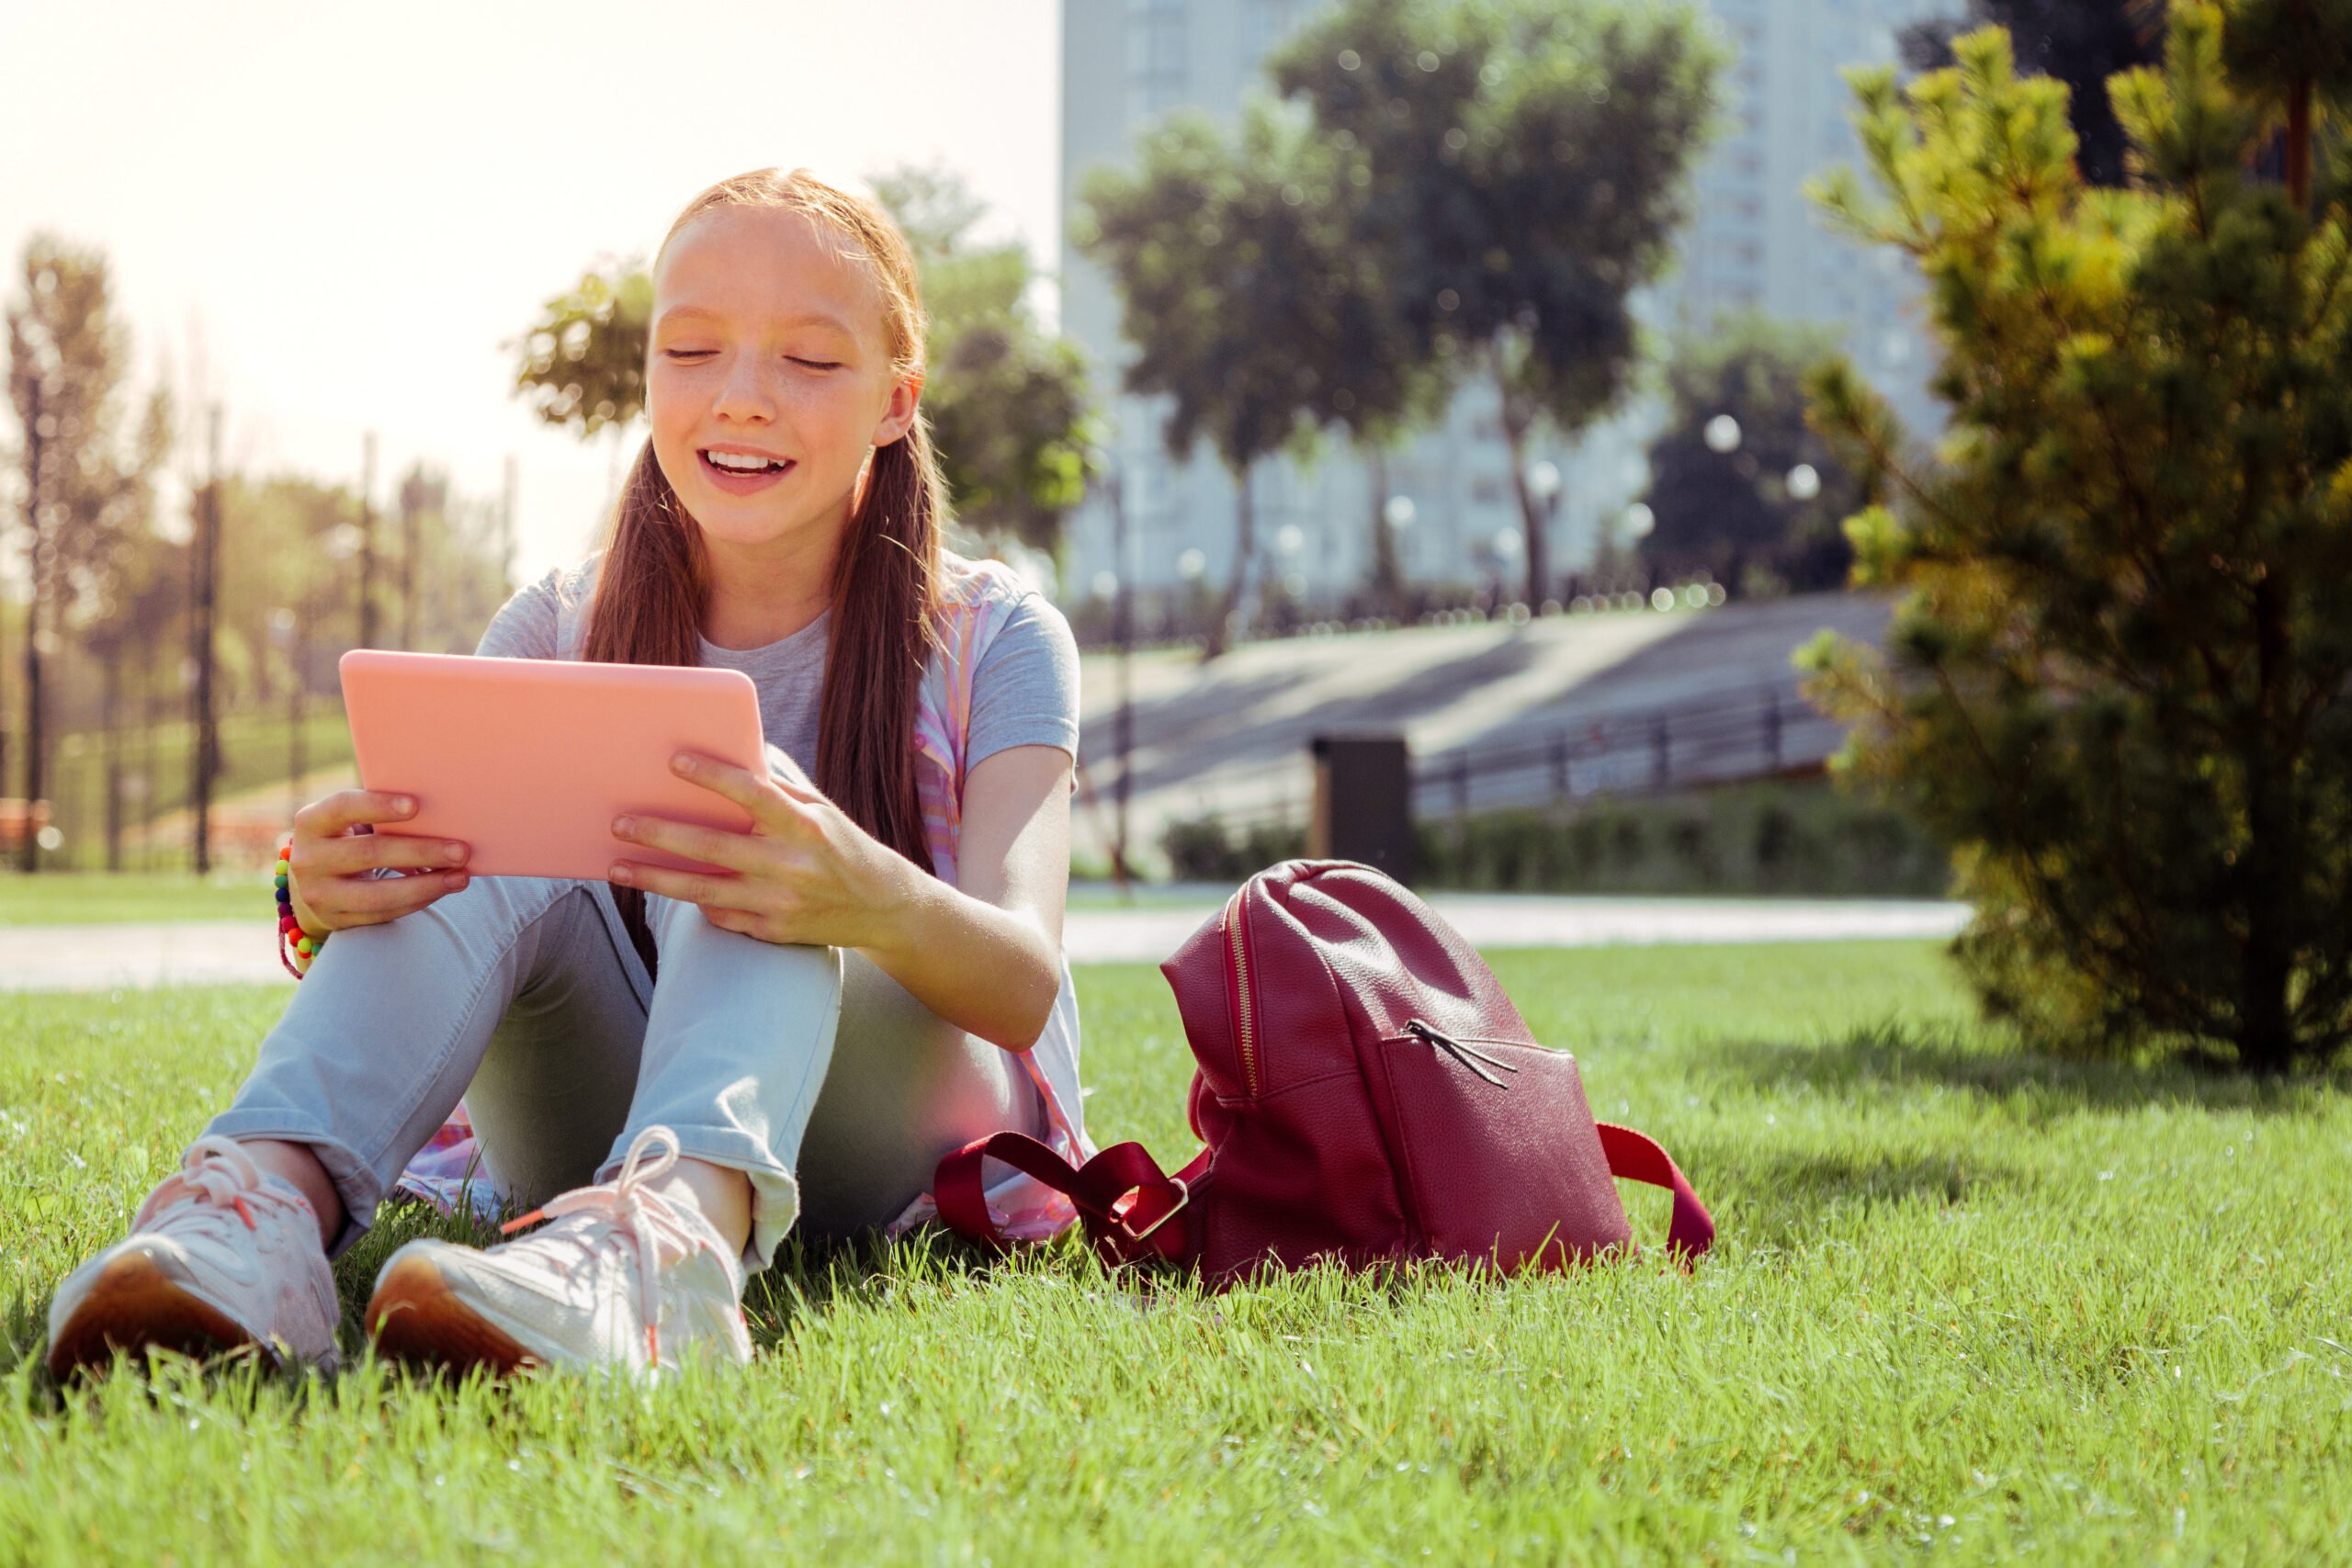 Green grass. Cheerful girl sitting on grass while staring at her tablet